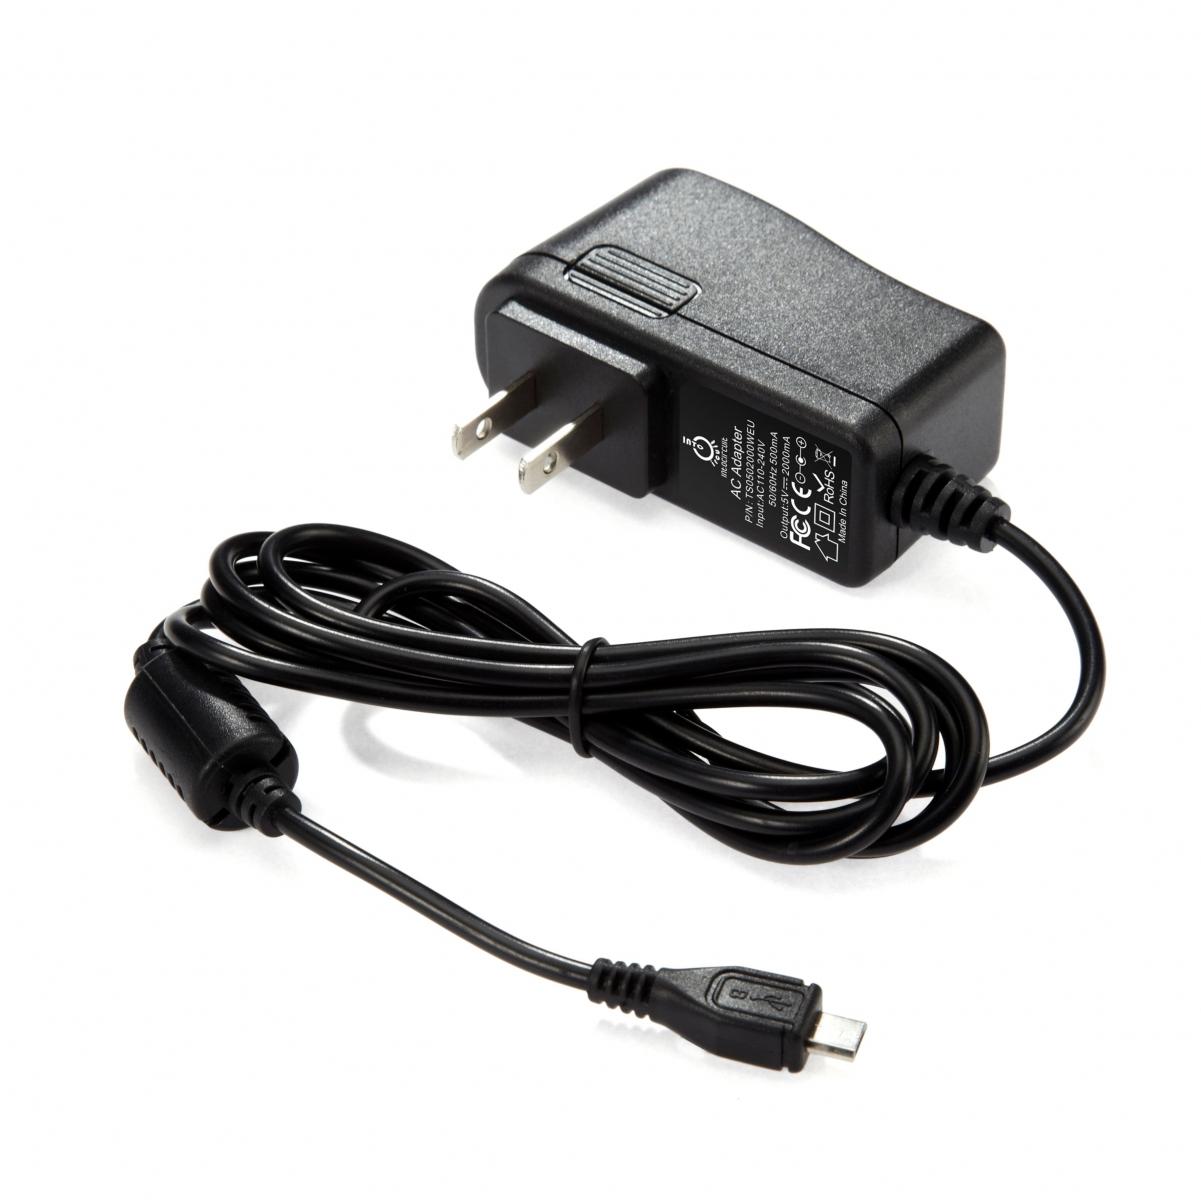 AC Adapter Charger for ASUS Transformer Book T100 Series.